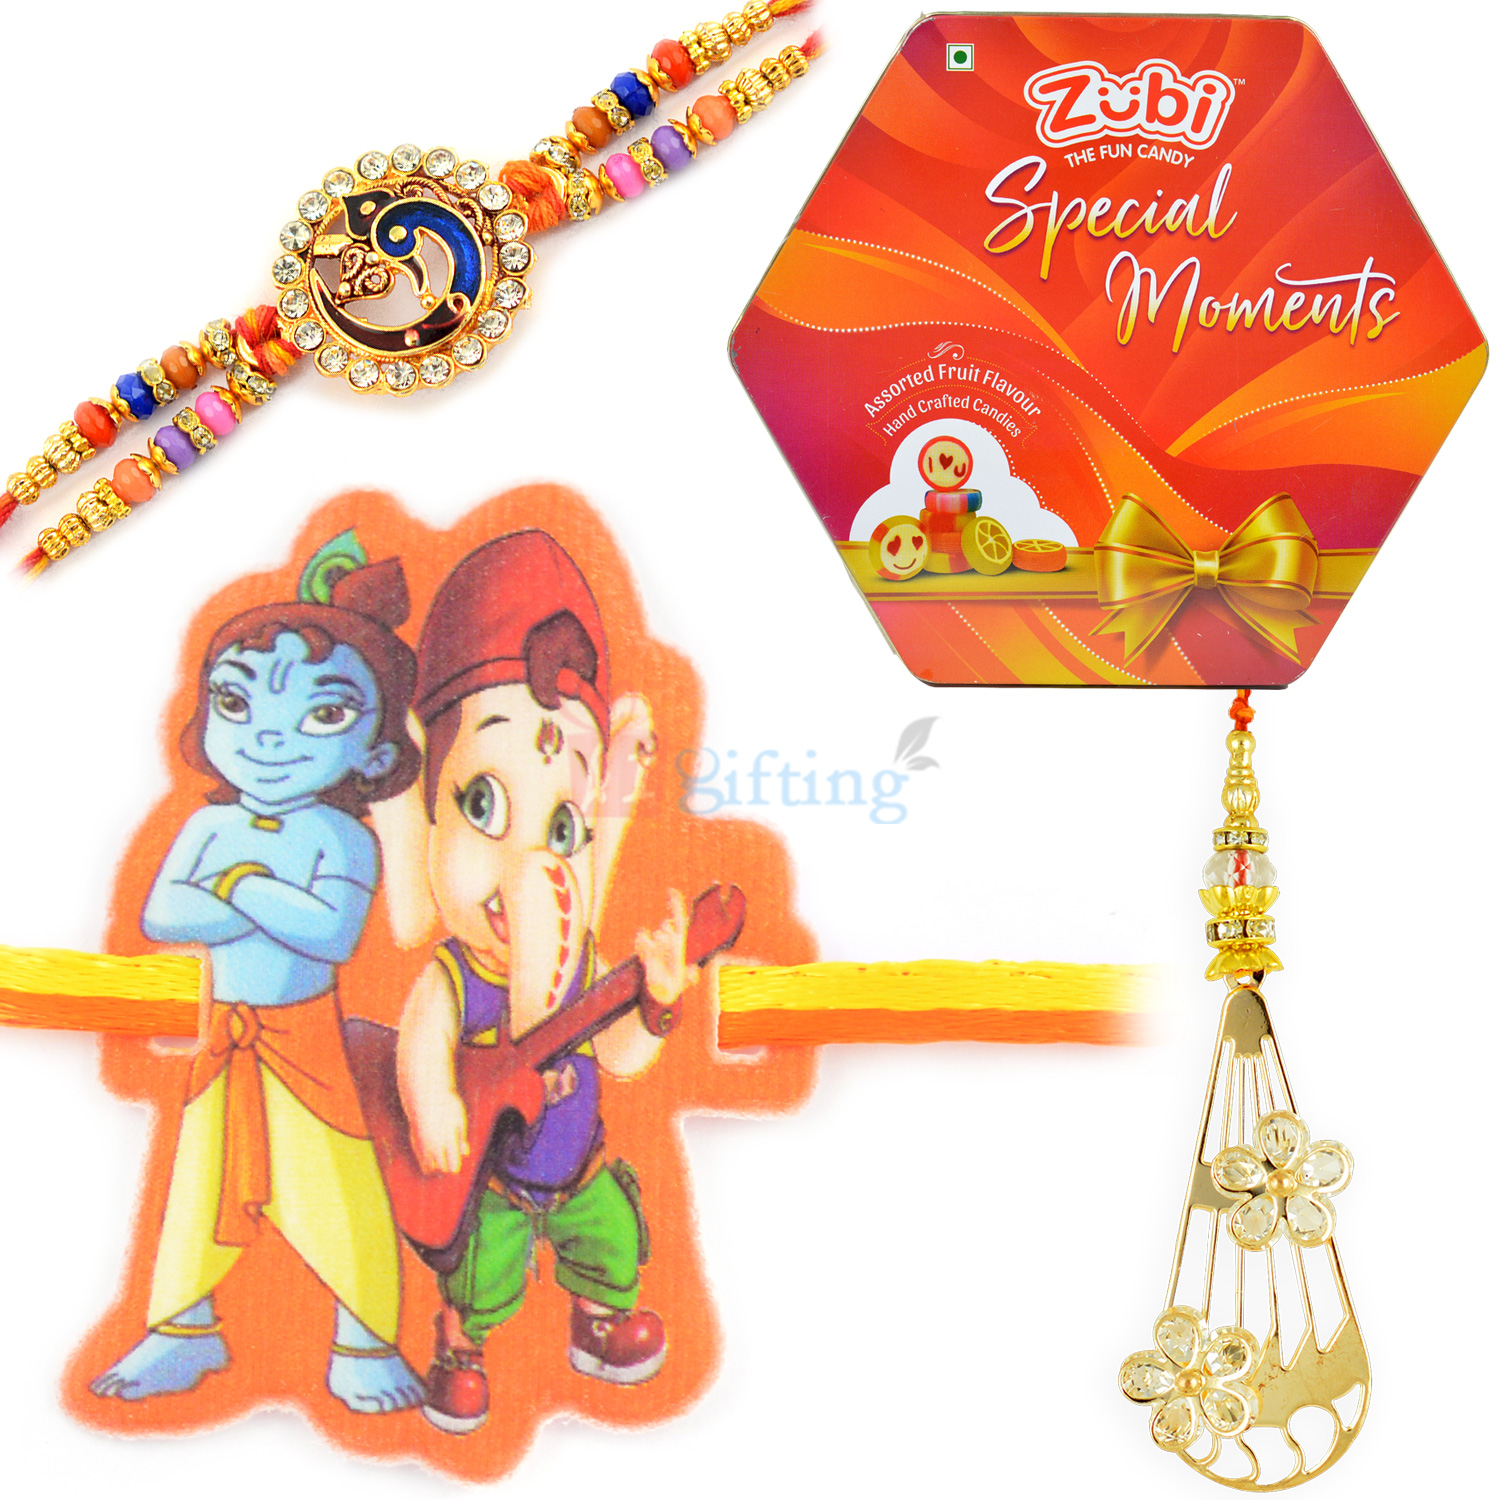 Zubi Special Moments Box with Lumba Brother and Kids Rakhi Set